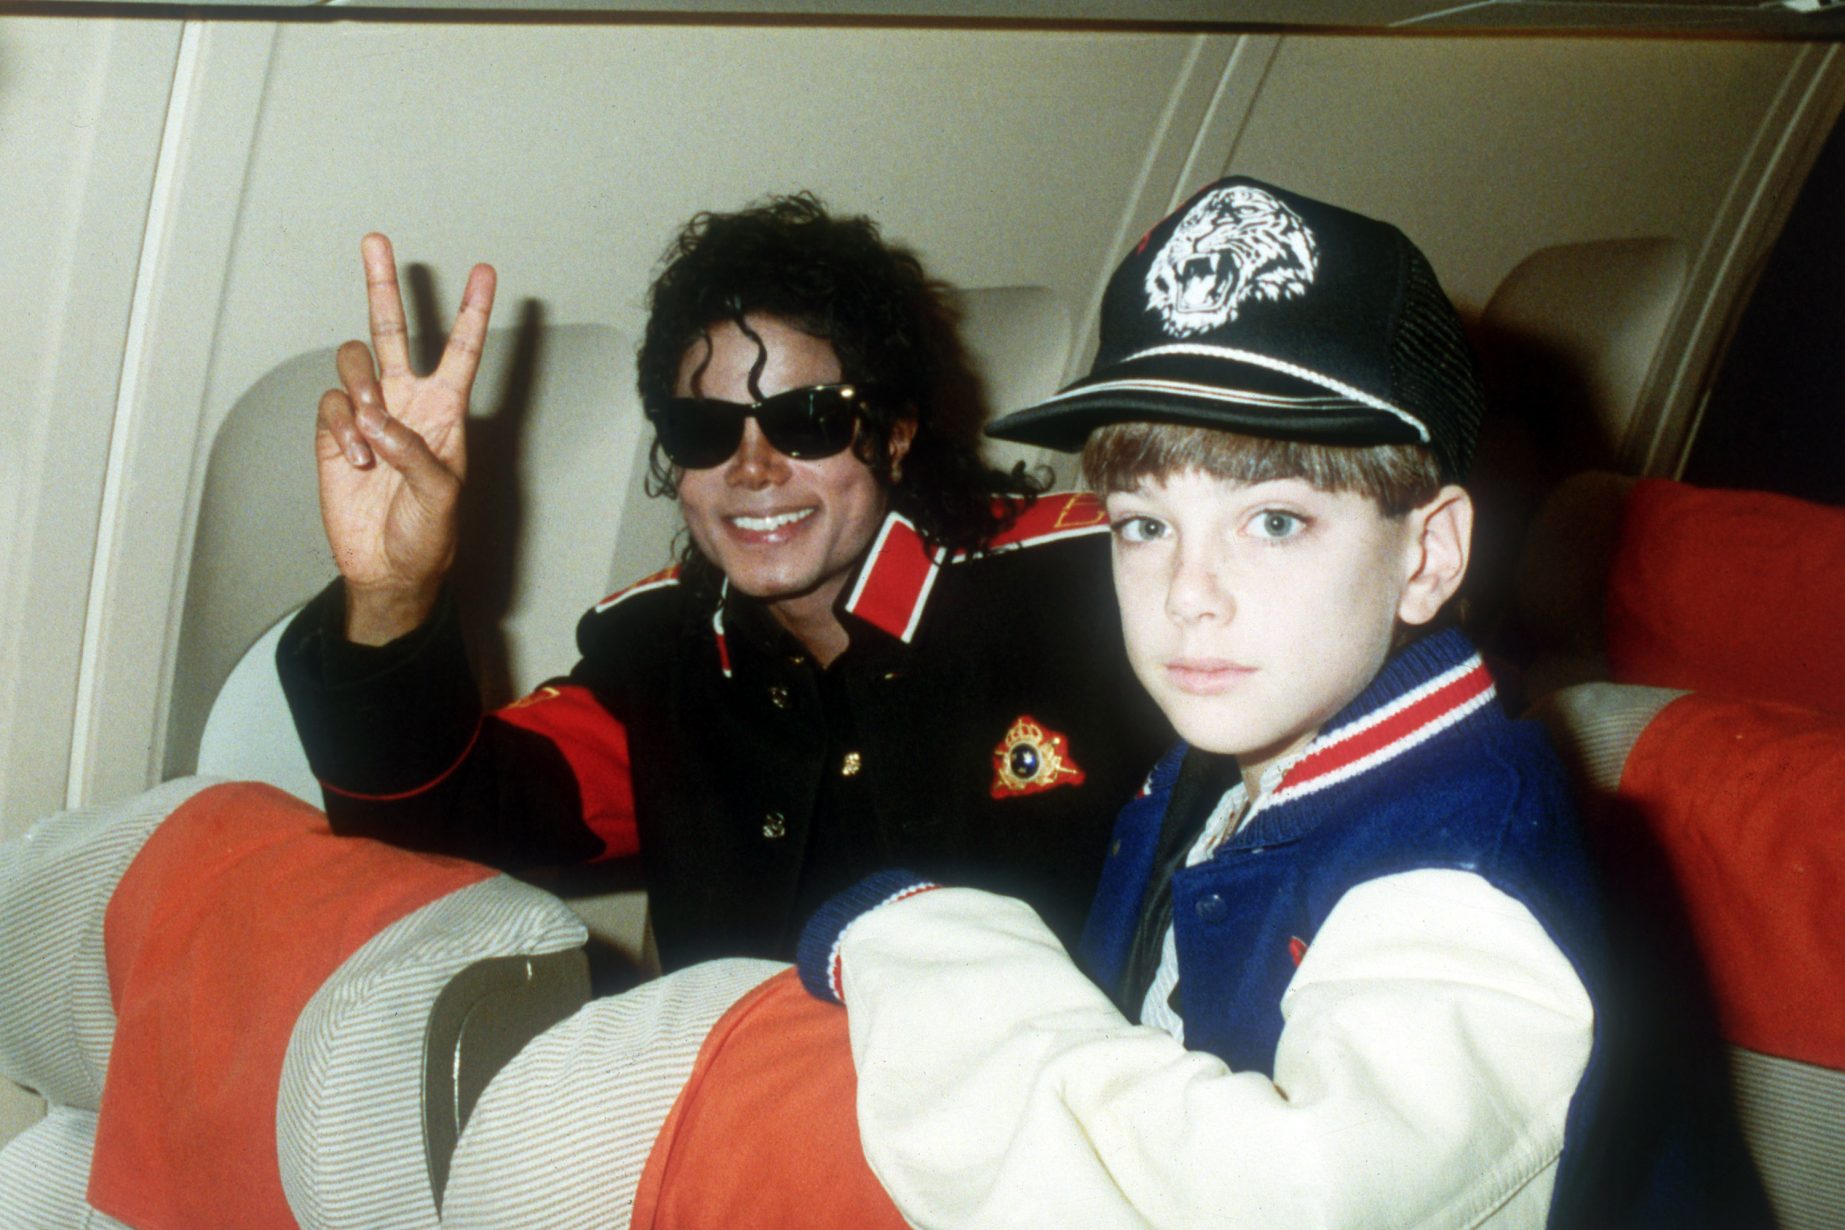 UNSPECIFIED - JULY 11: Michael Jackson with 10 year old Jimmy Suchcraft on the tour plane on 11th of July 1988.(Photo by Dave Hogan/Getty Images)